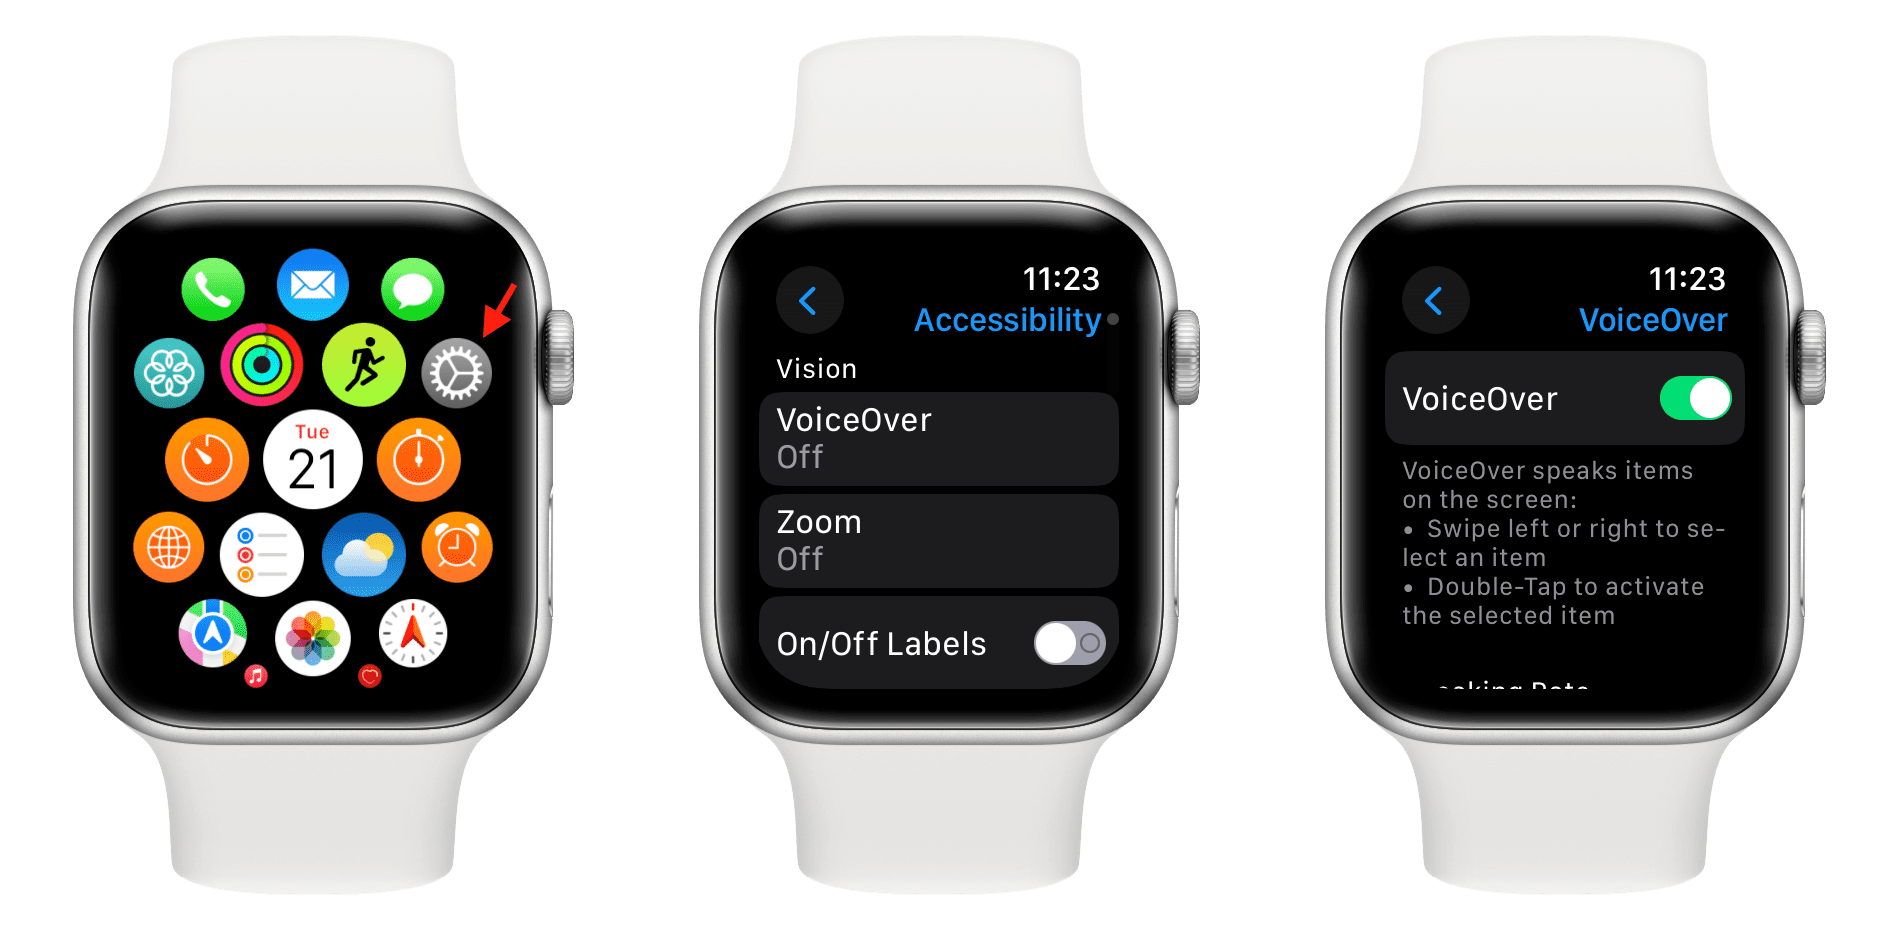 Turn on VoiceOver on Apple Watch